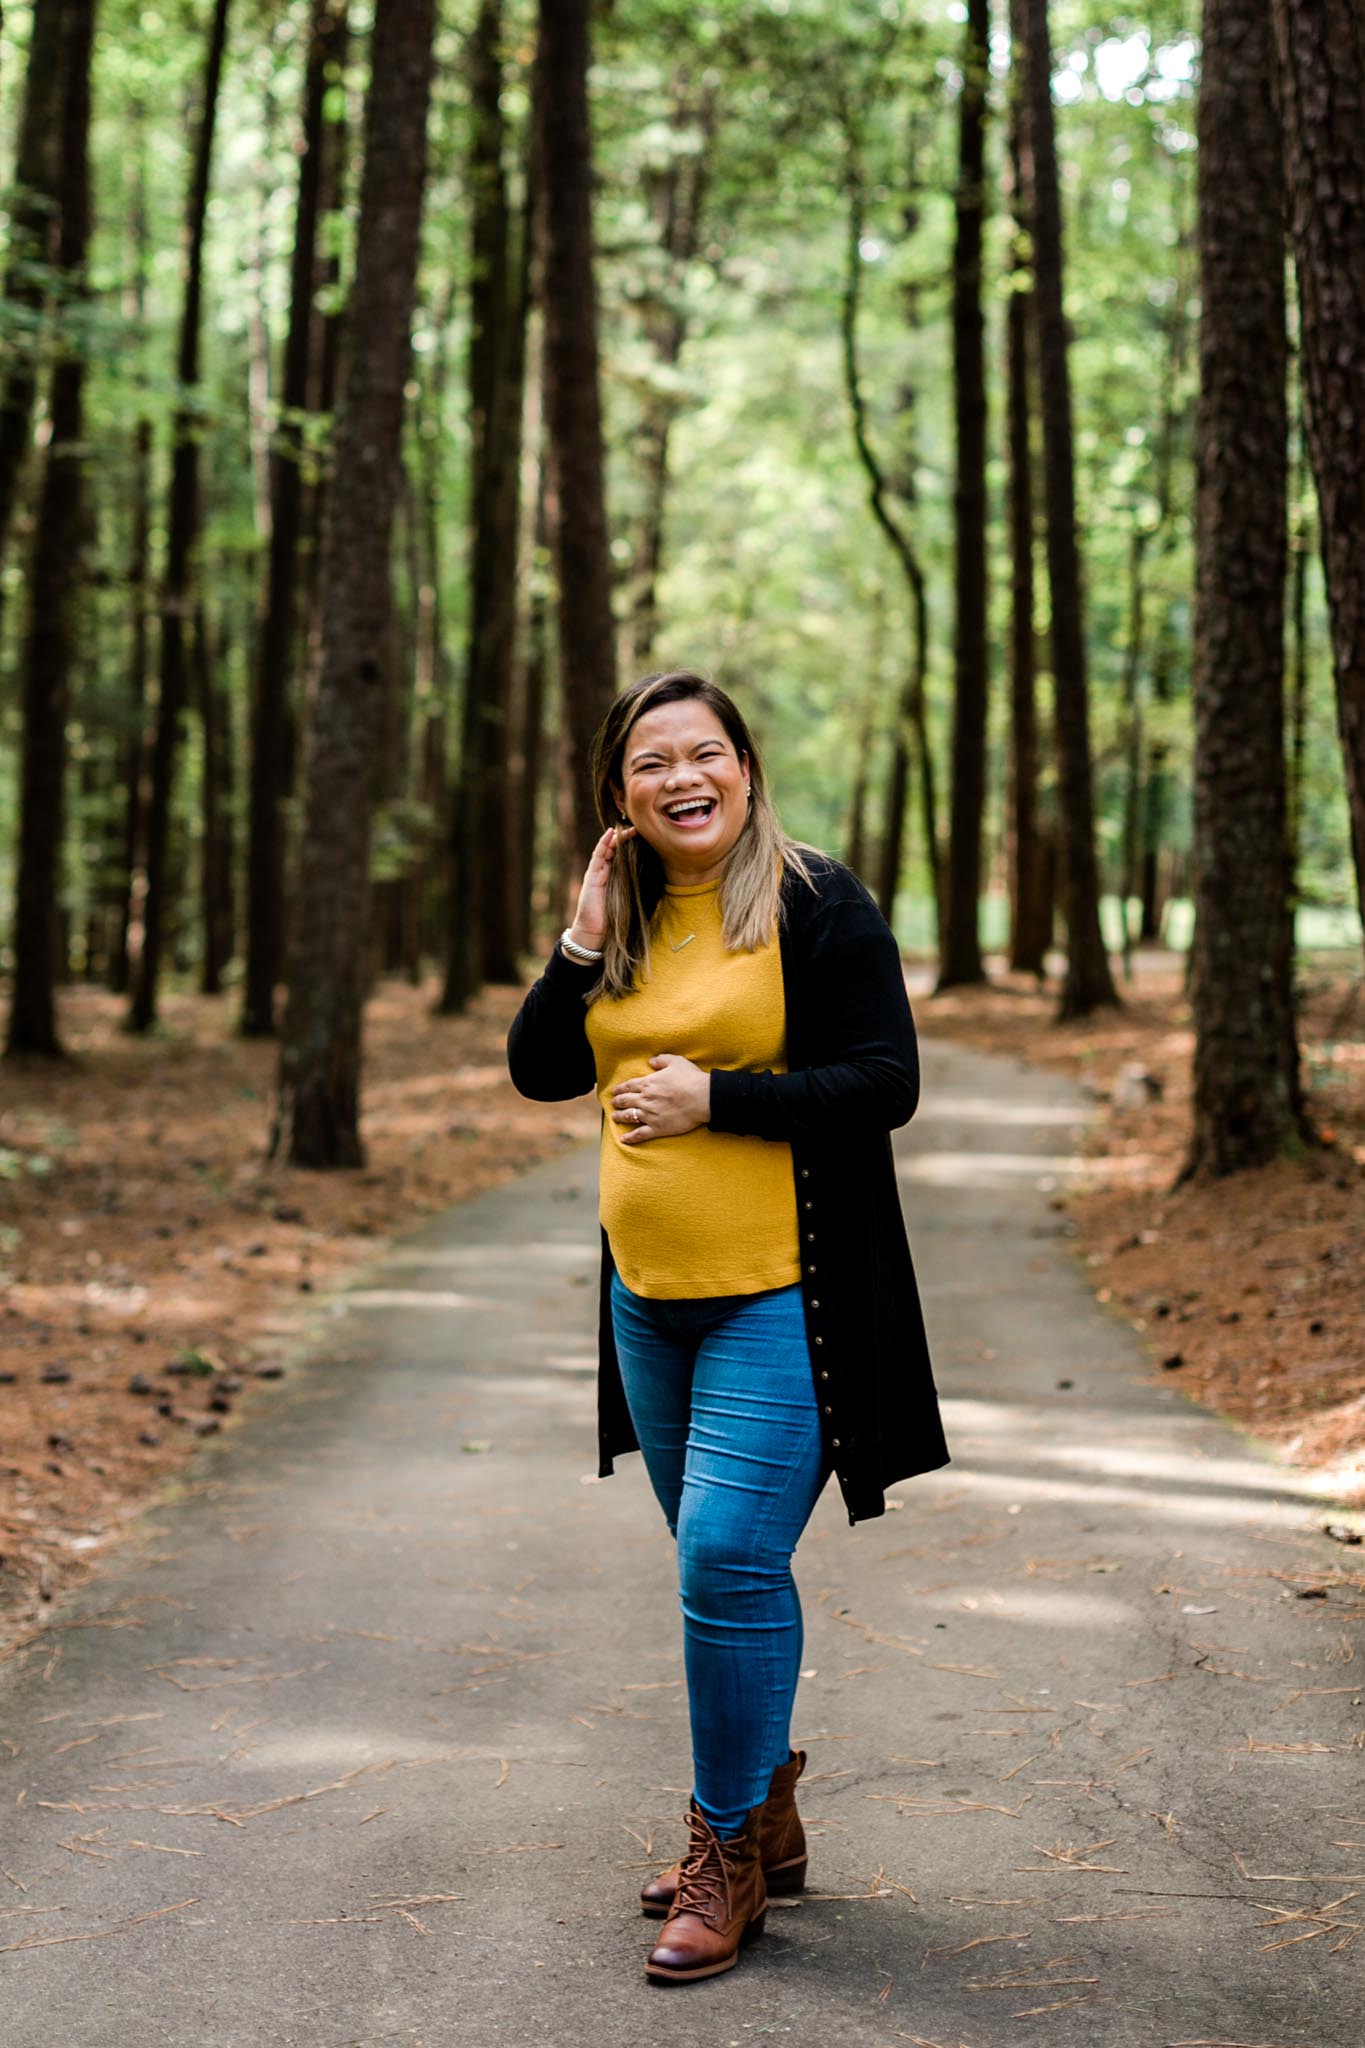 Maternity Photo at Umstead Park | Raleigh Maternity Photographer | By G. Lin Photography | Woman laughing and smiling at camera in forest